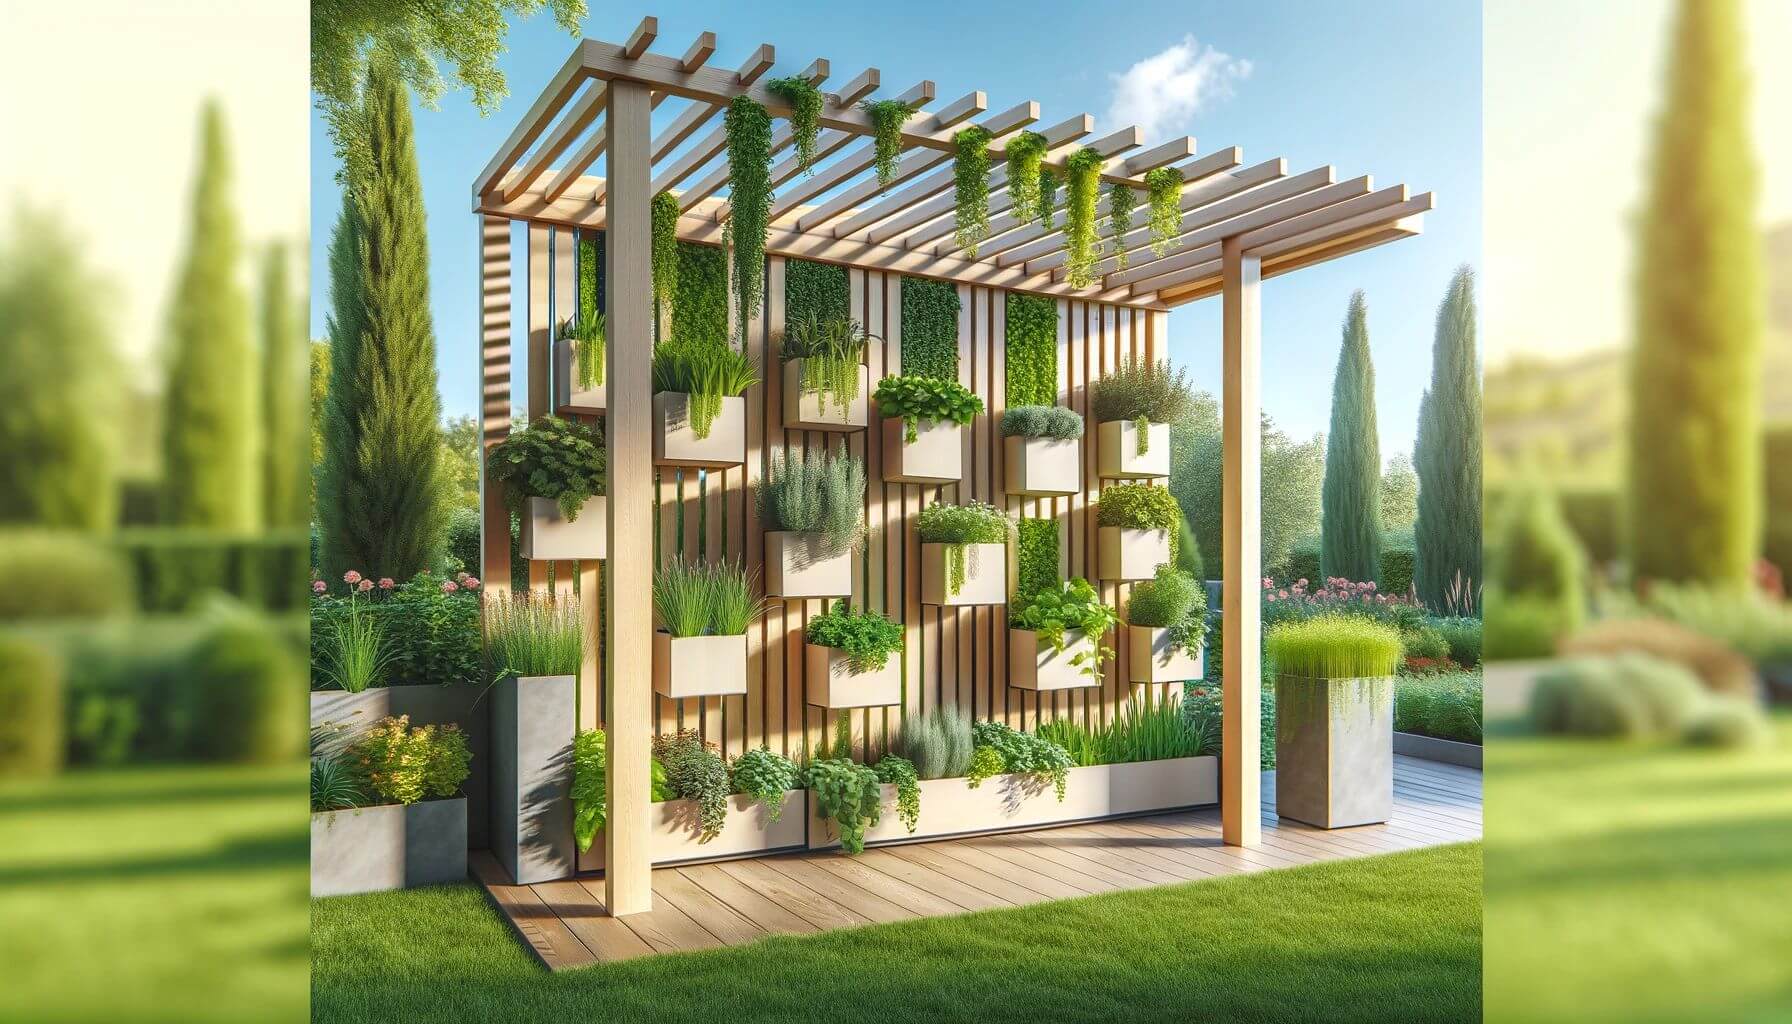 Mazimize small outdoor space with Pergola and vertical planters attached to its posts